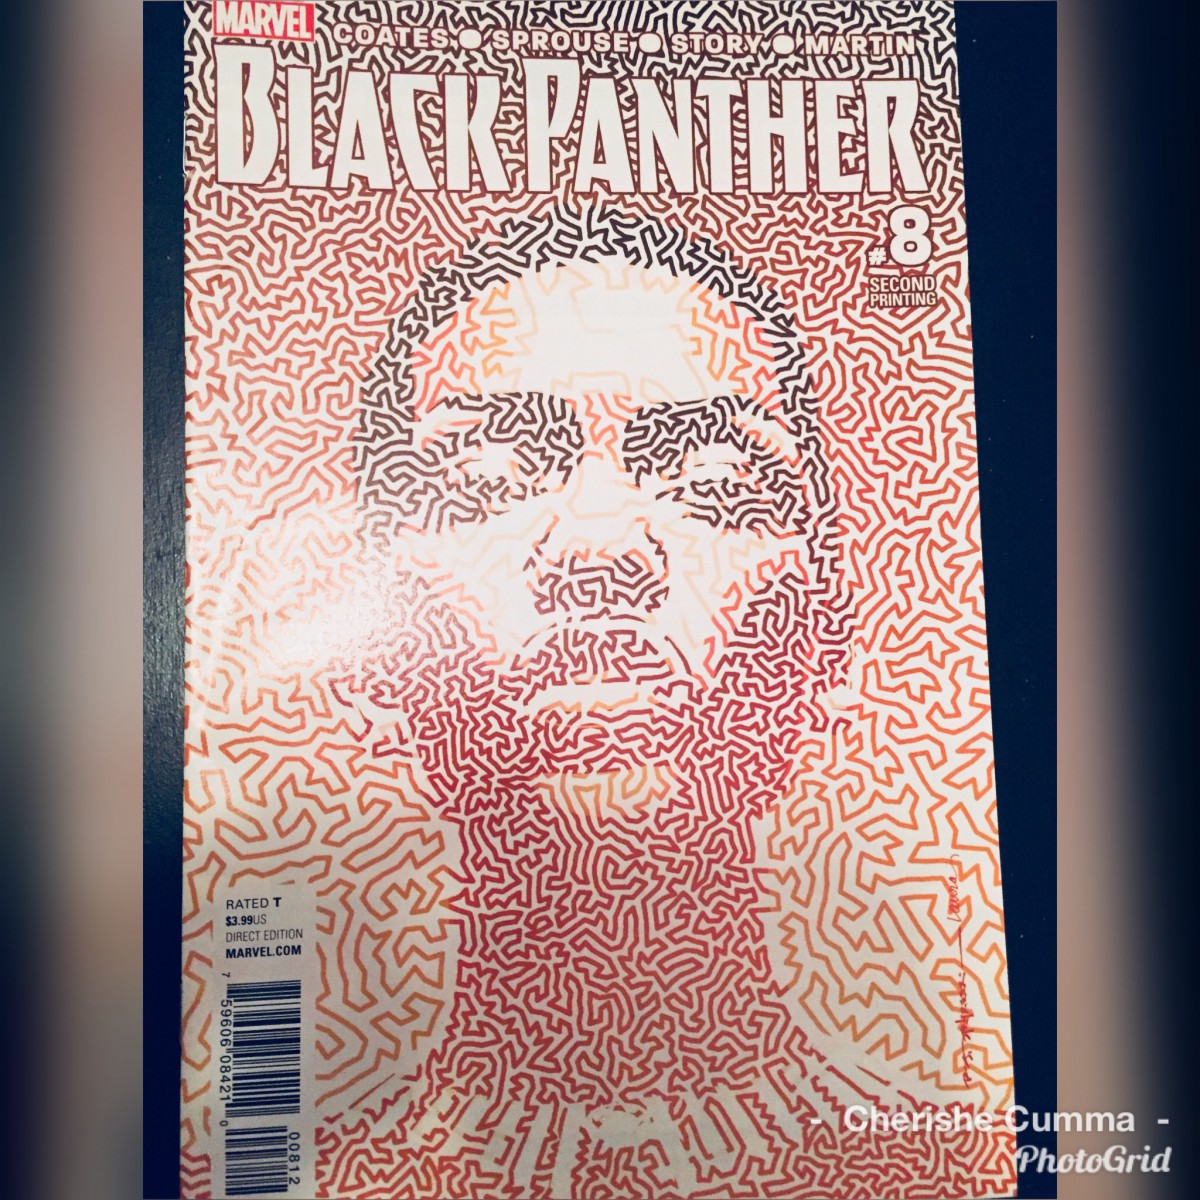 Black Panther download the new version for apple